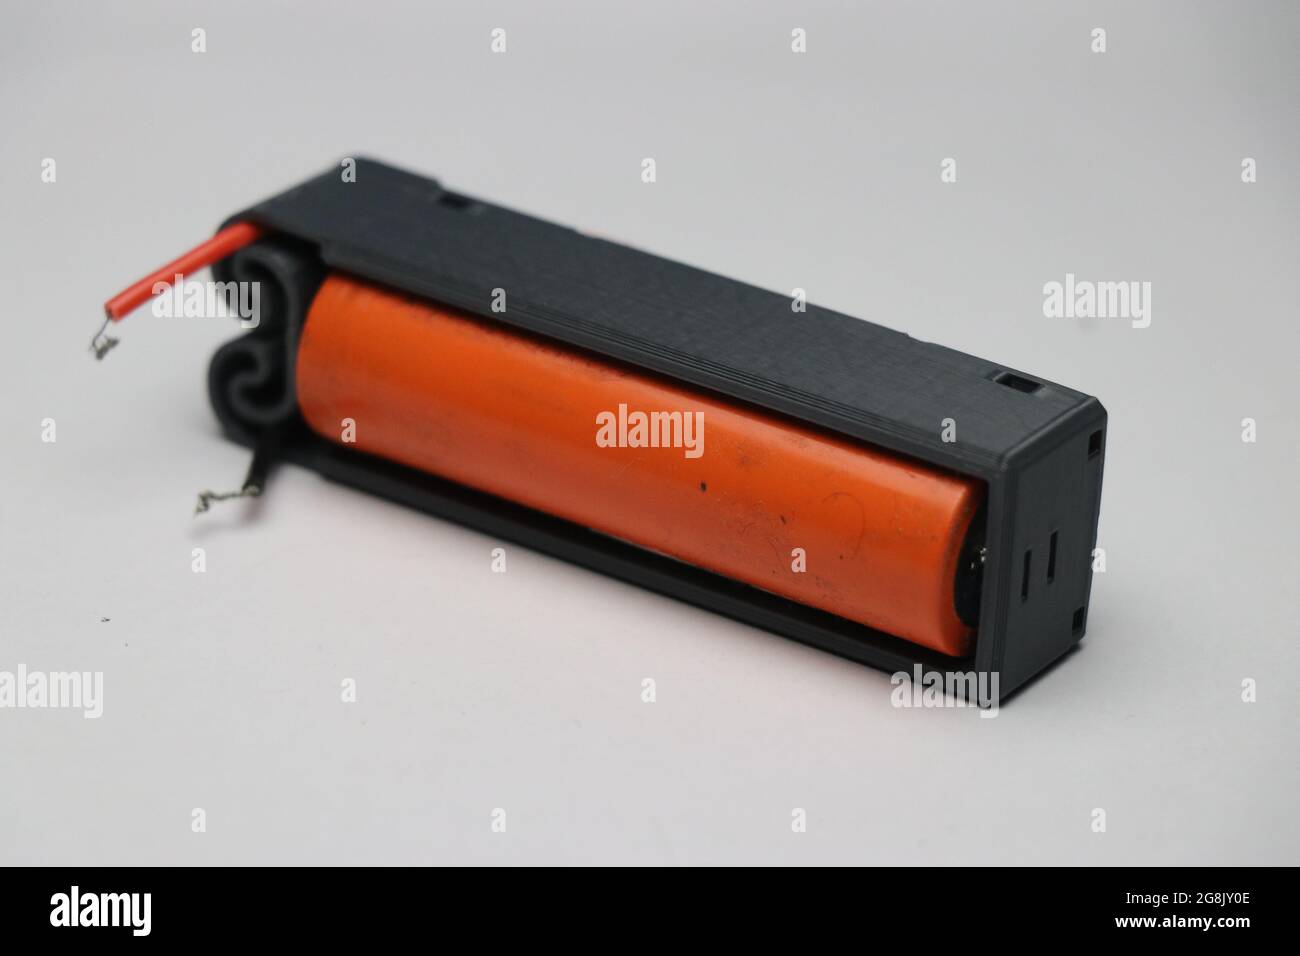 Lithium ion which is rechargeable type of battery connected to its holder Stock Photo